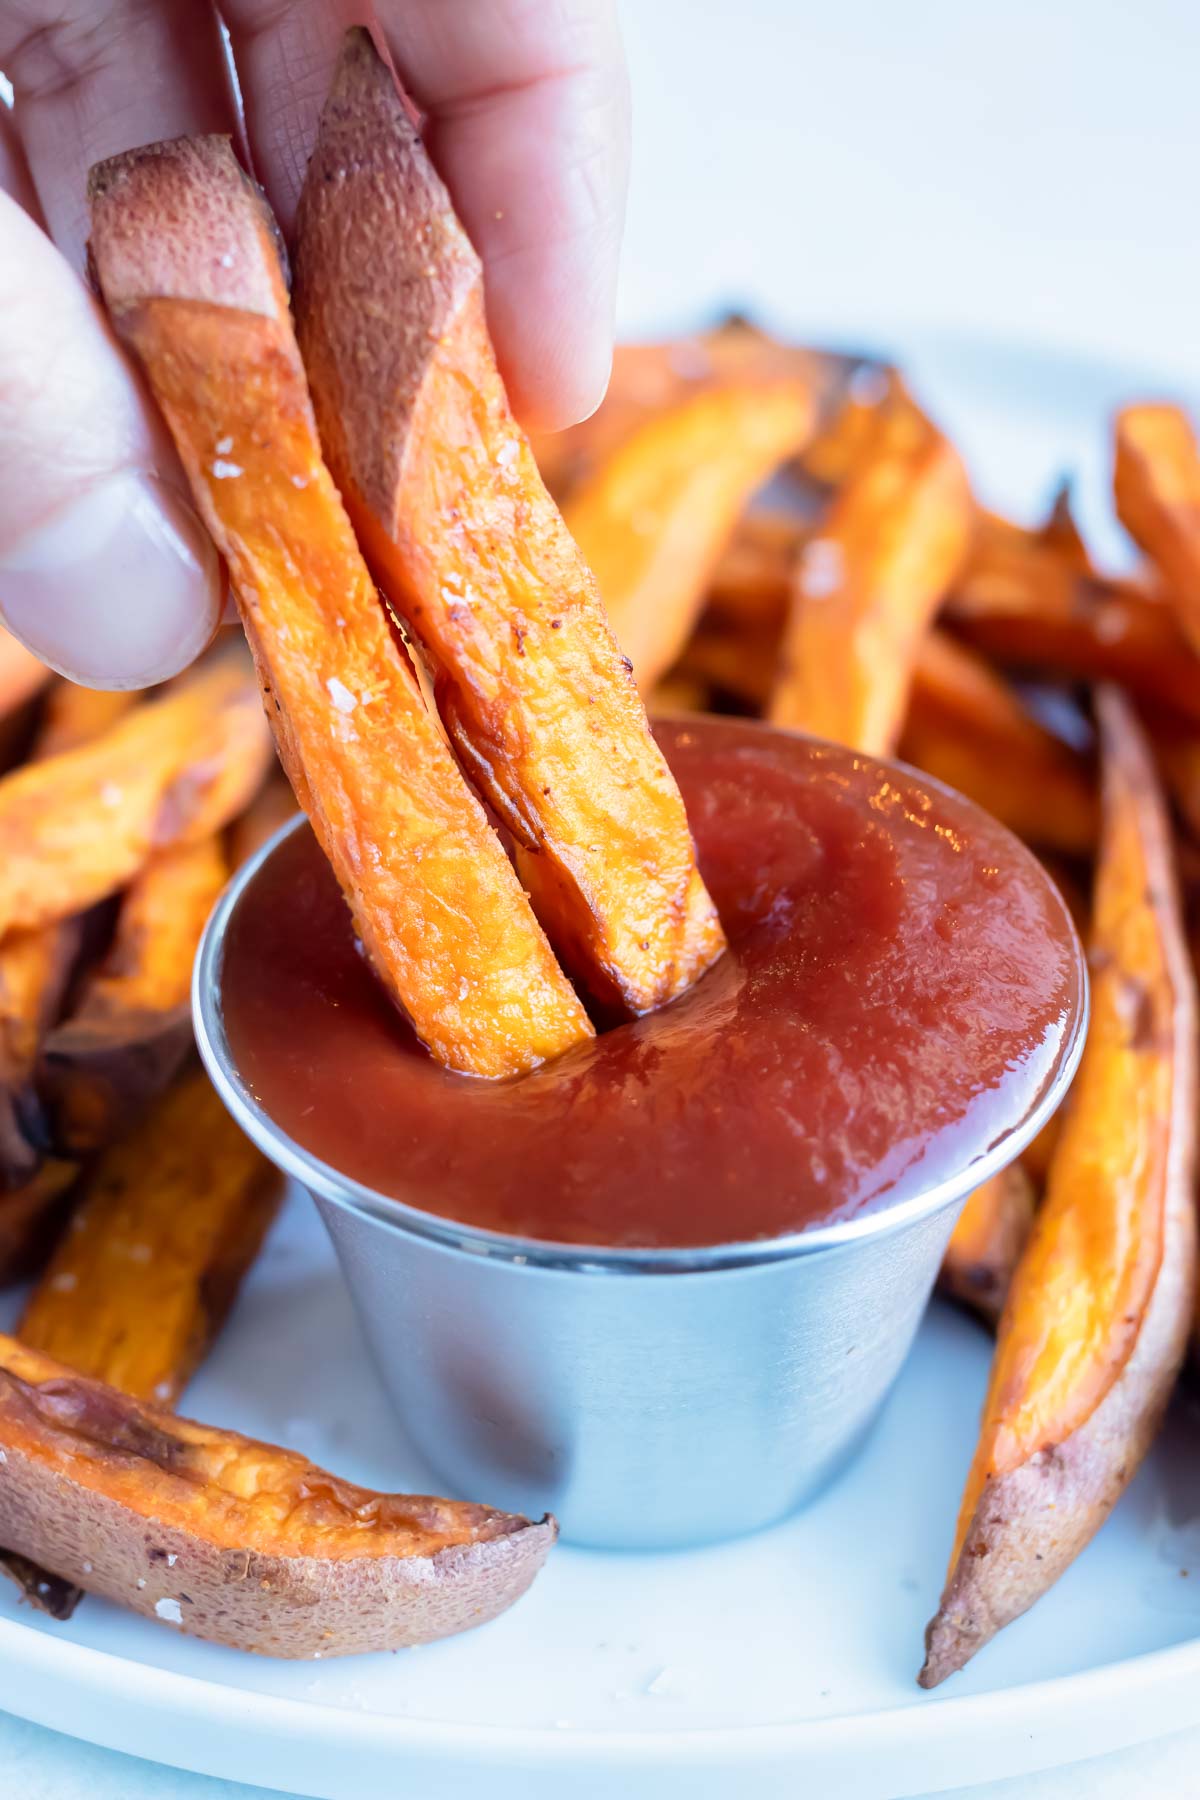 Two sweet potato fries are dipped into ketchup.